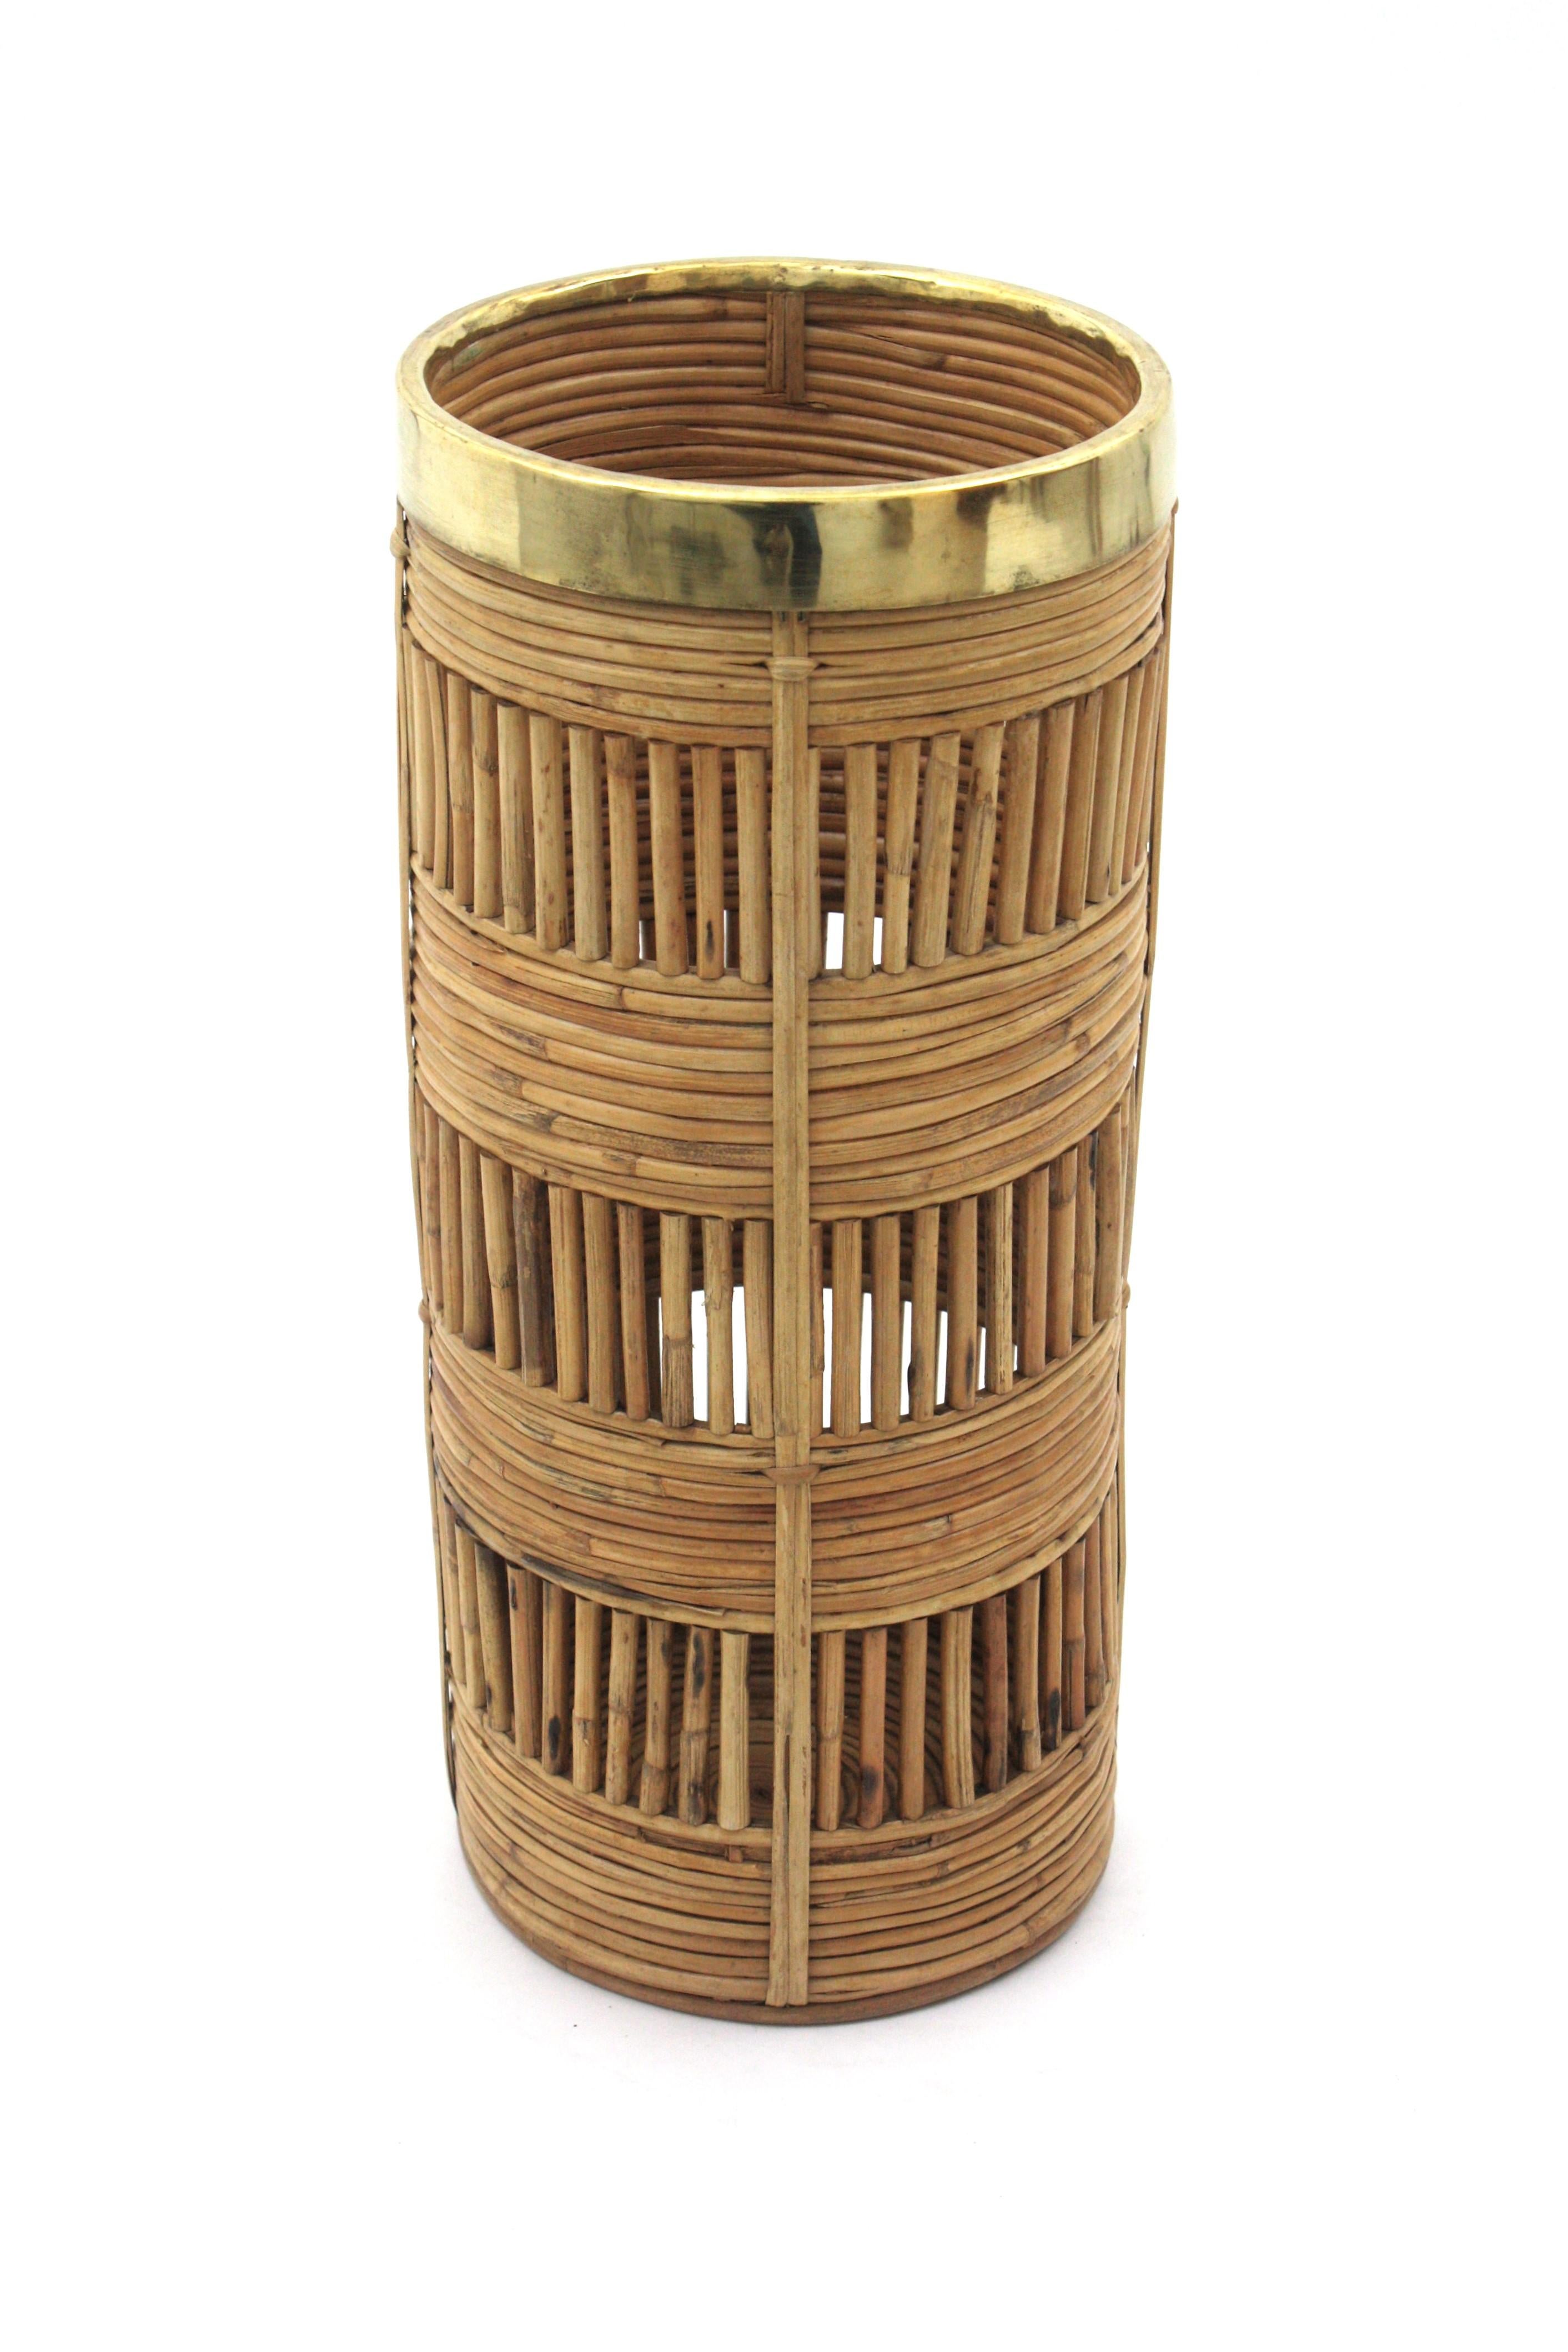 Rattan Umbrella Stand with Brass Rim, Italy, 1970s For Sale 2